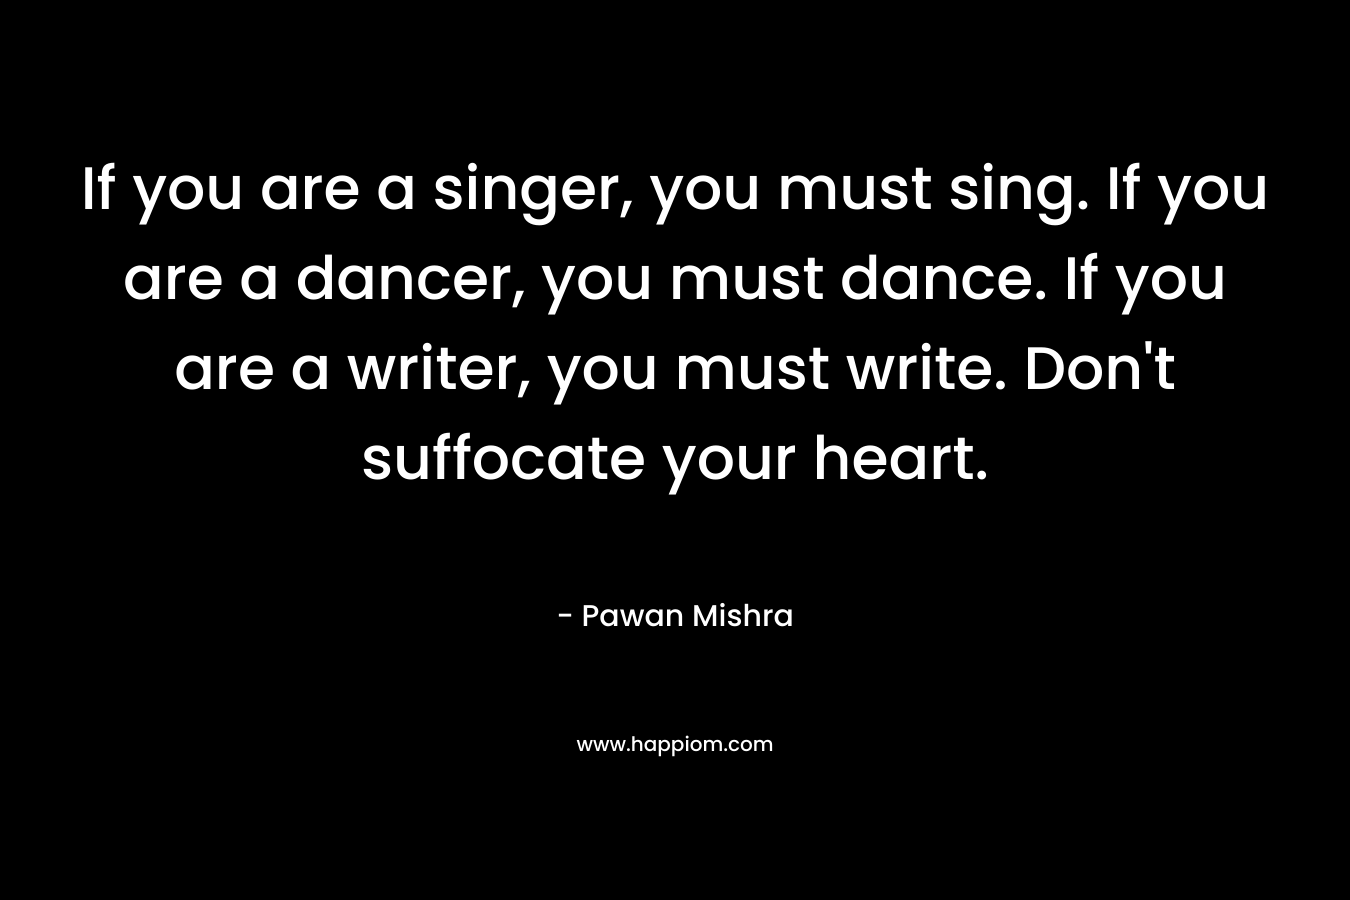 If you are a singer, you must sing. If you are a dancer, you must dance. If you are a writer, you must write. Don’t suffocate your heart. – Pawan Mishra